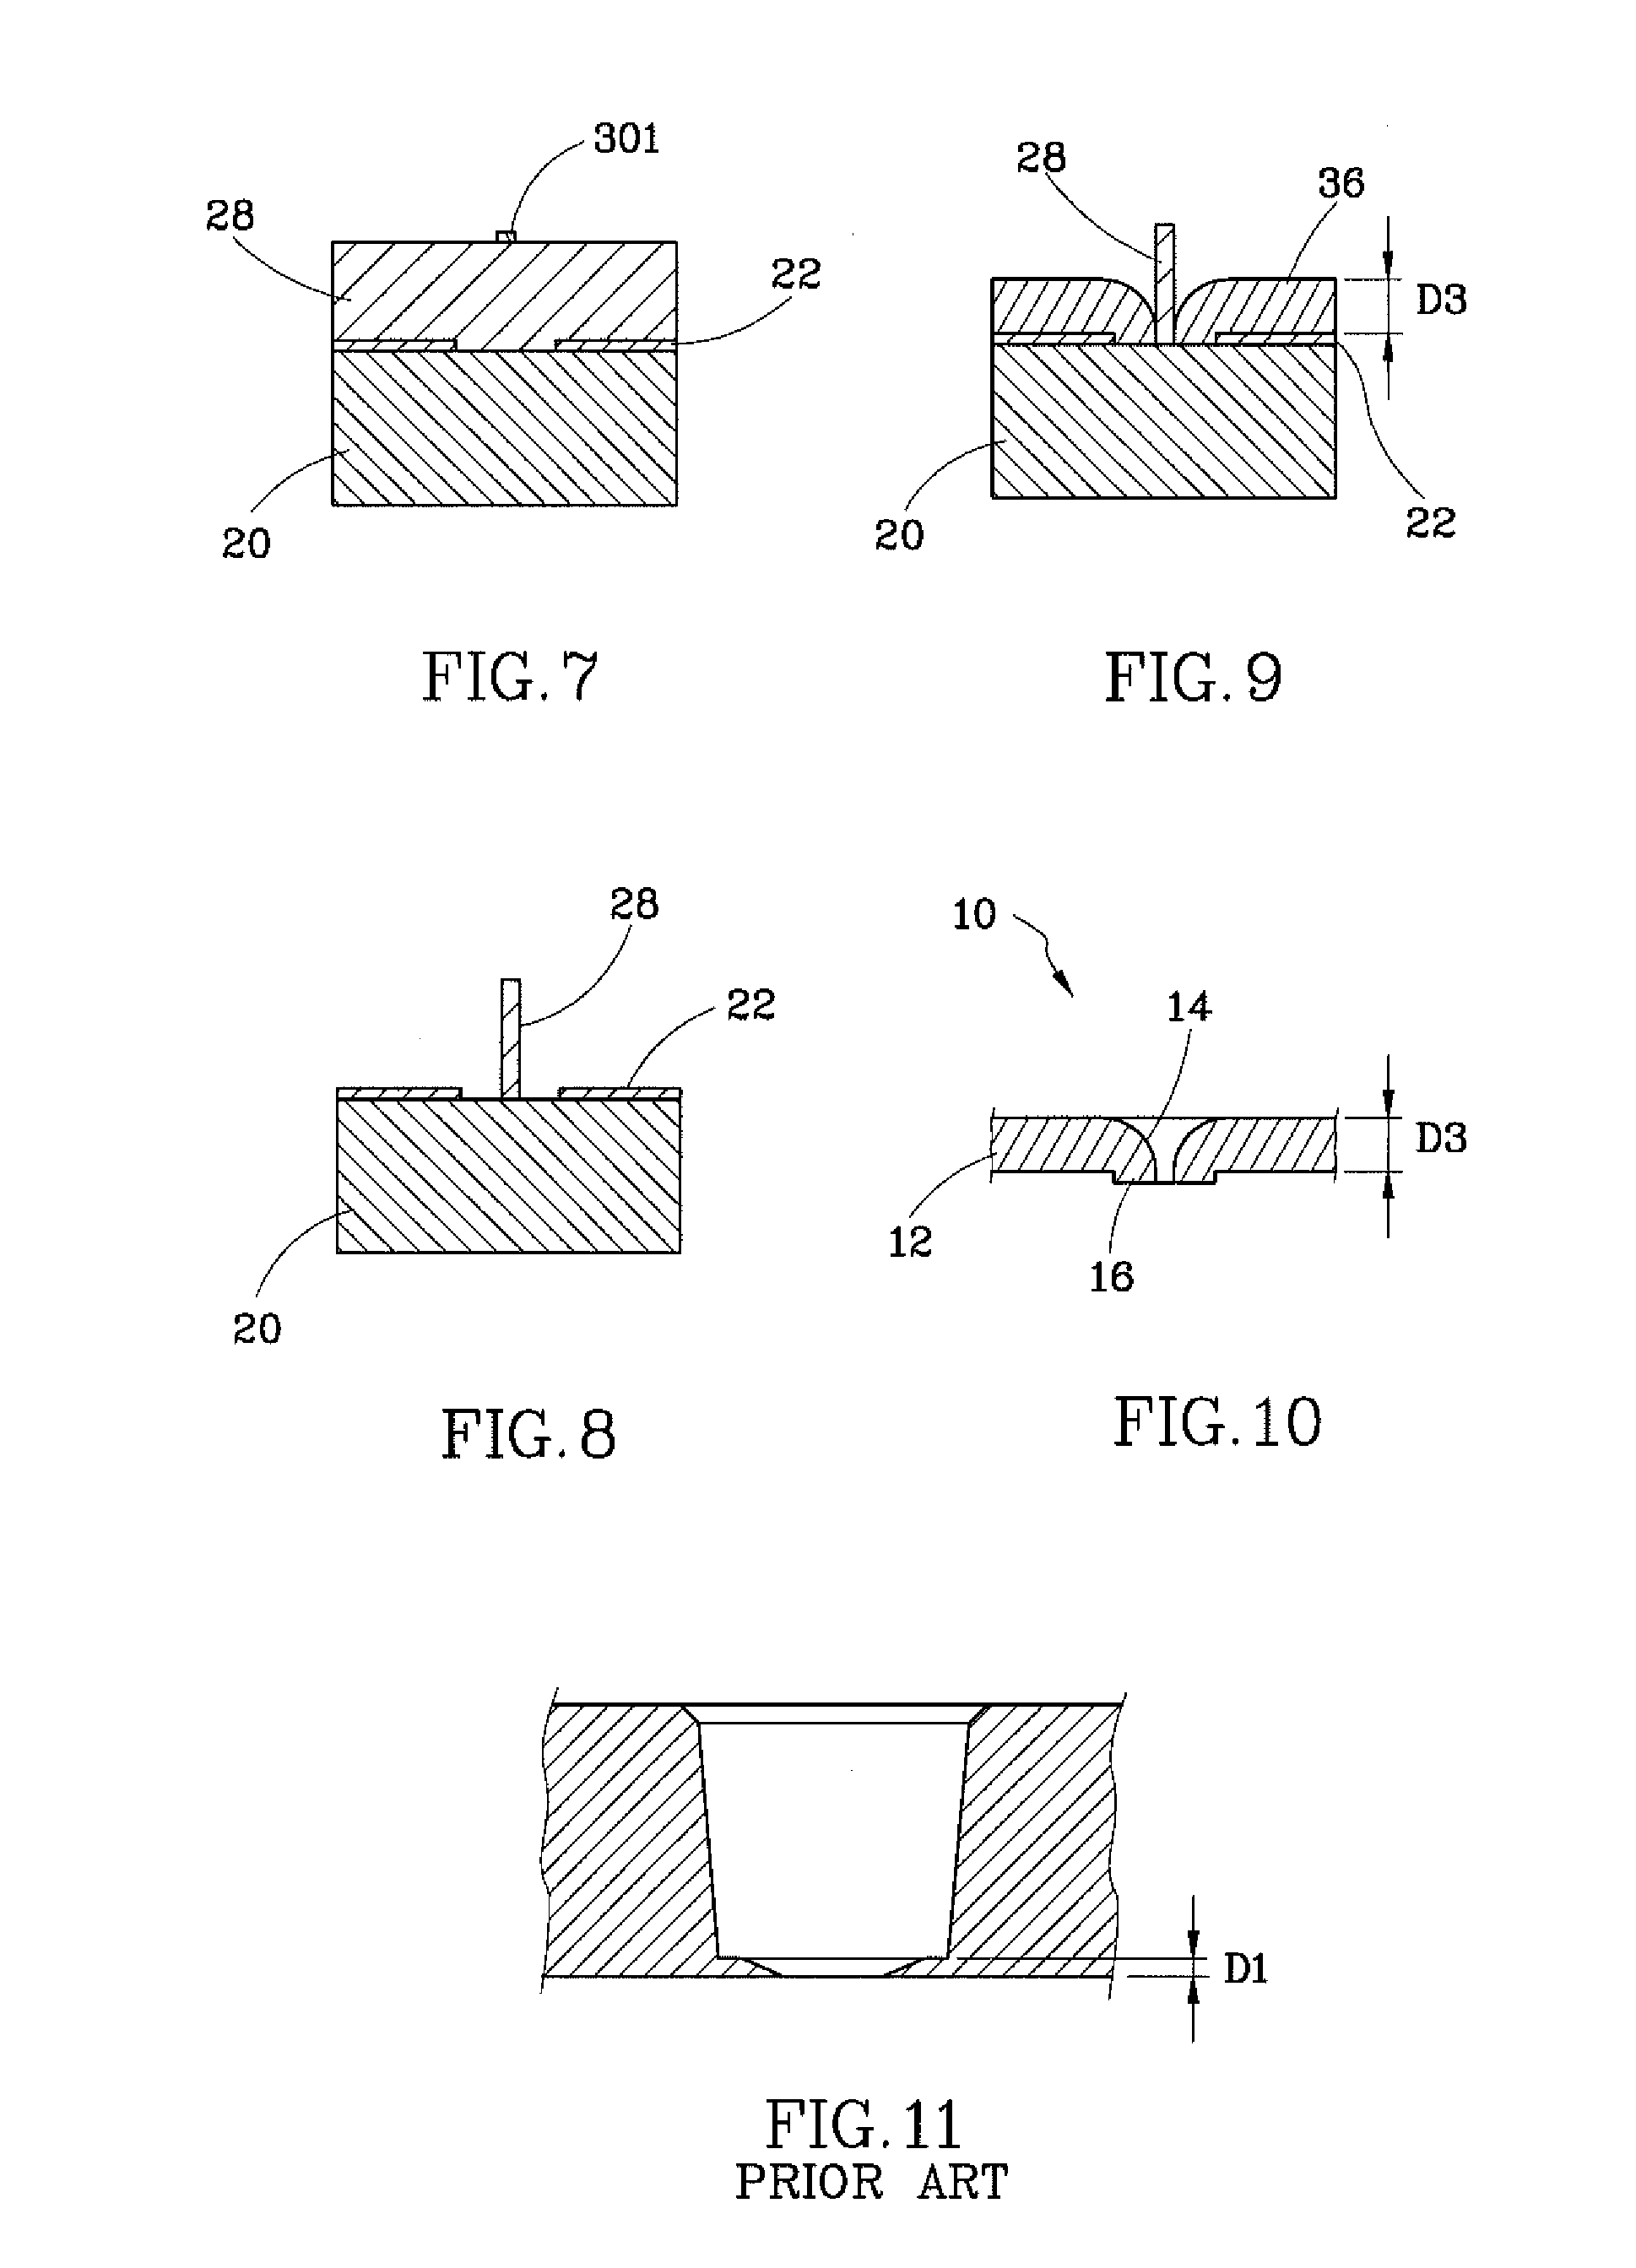 Method for manufacturing a nozzle plate containing multiple micro-orifices for cascade impactor